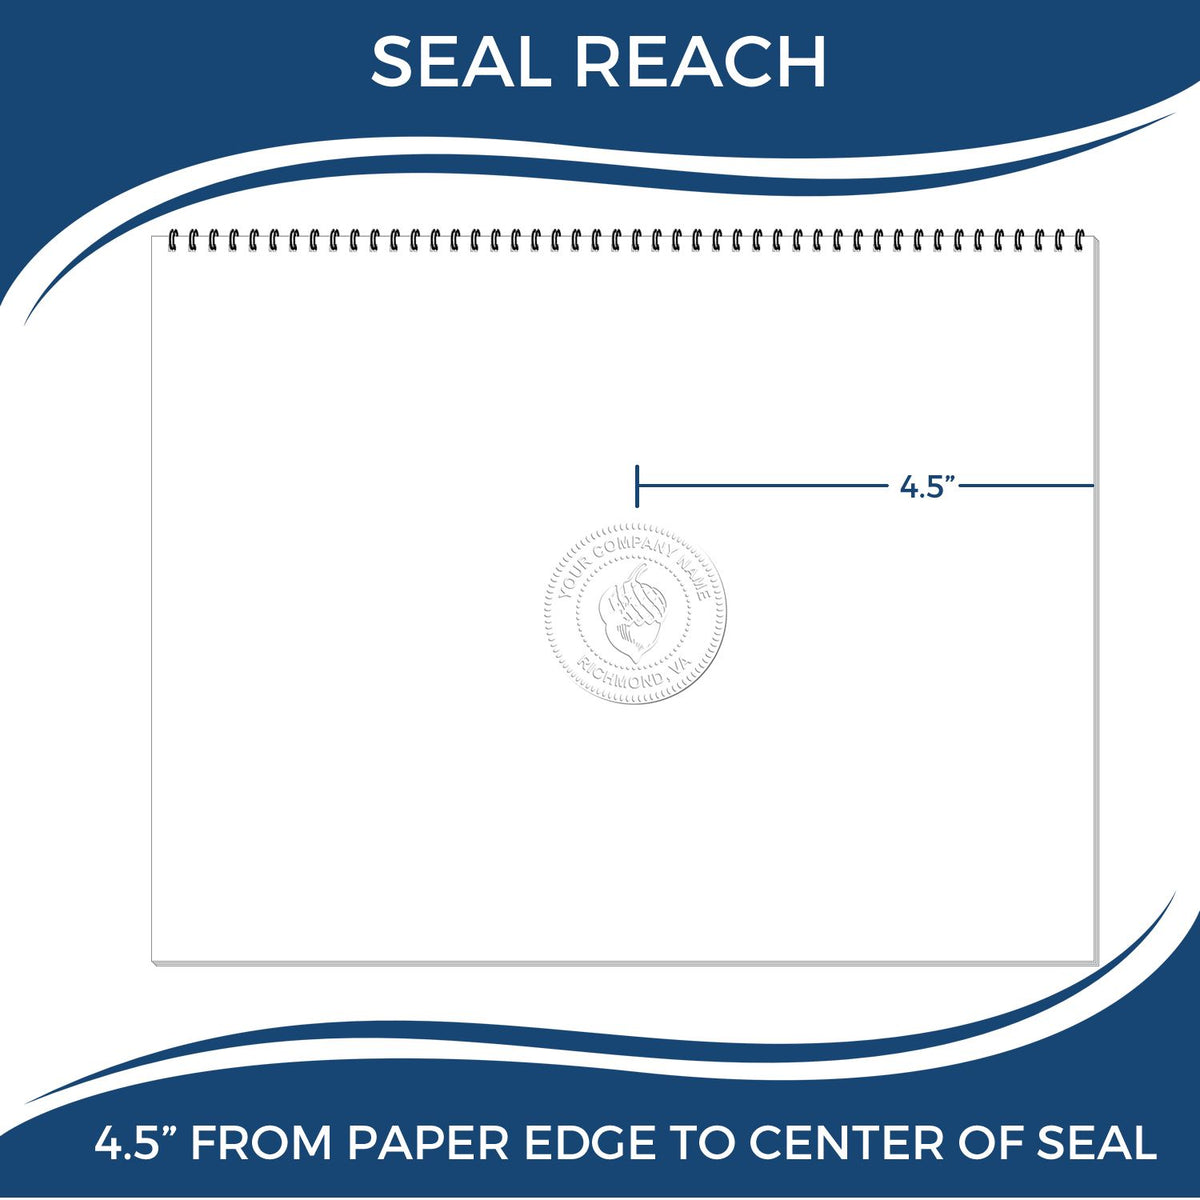 An infographic showing the seal reach which is represented by a ruler and a miniature seal image of the Extended Long Reach Missouri Architect Seal Embosser